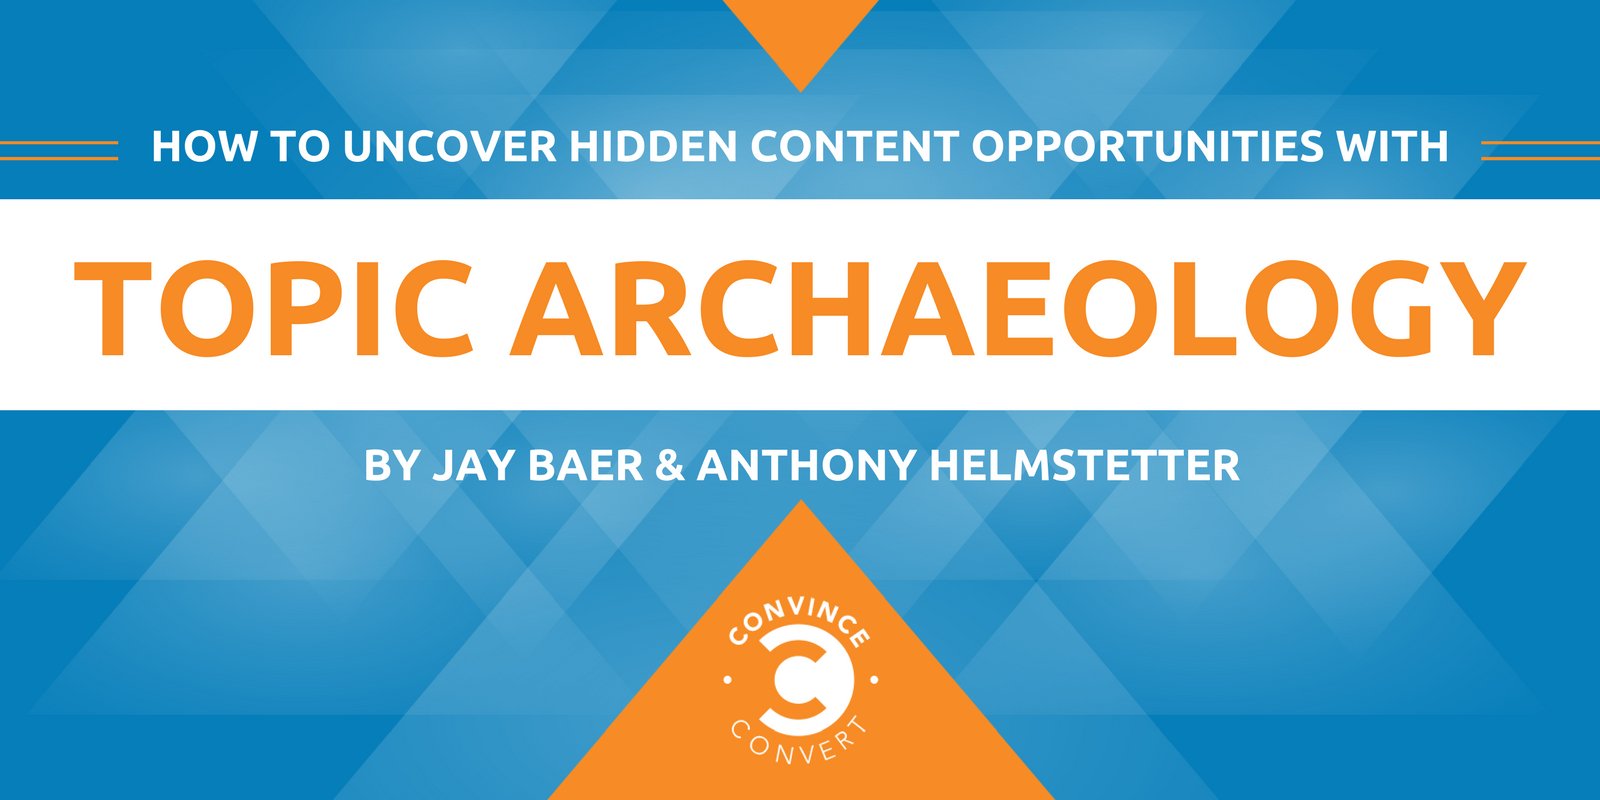 How to Uncover Hidden Content Opportunities with Topic Archaeology